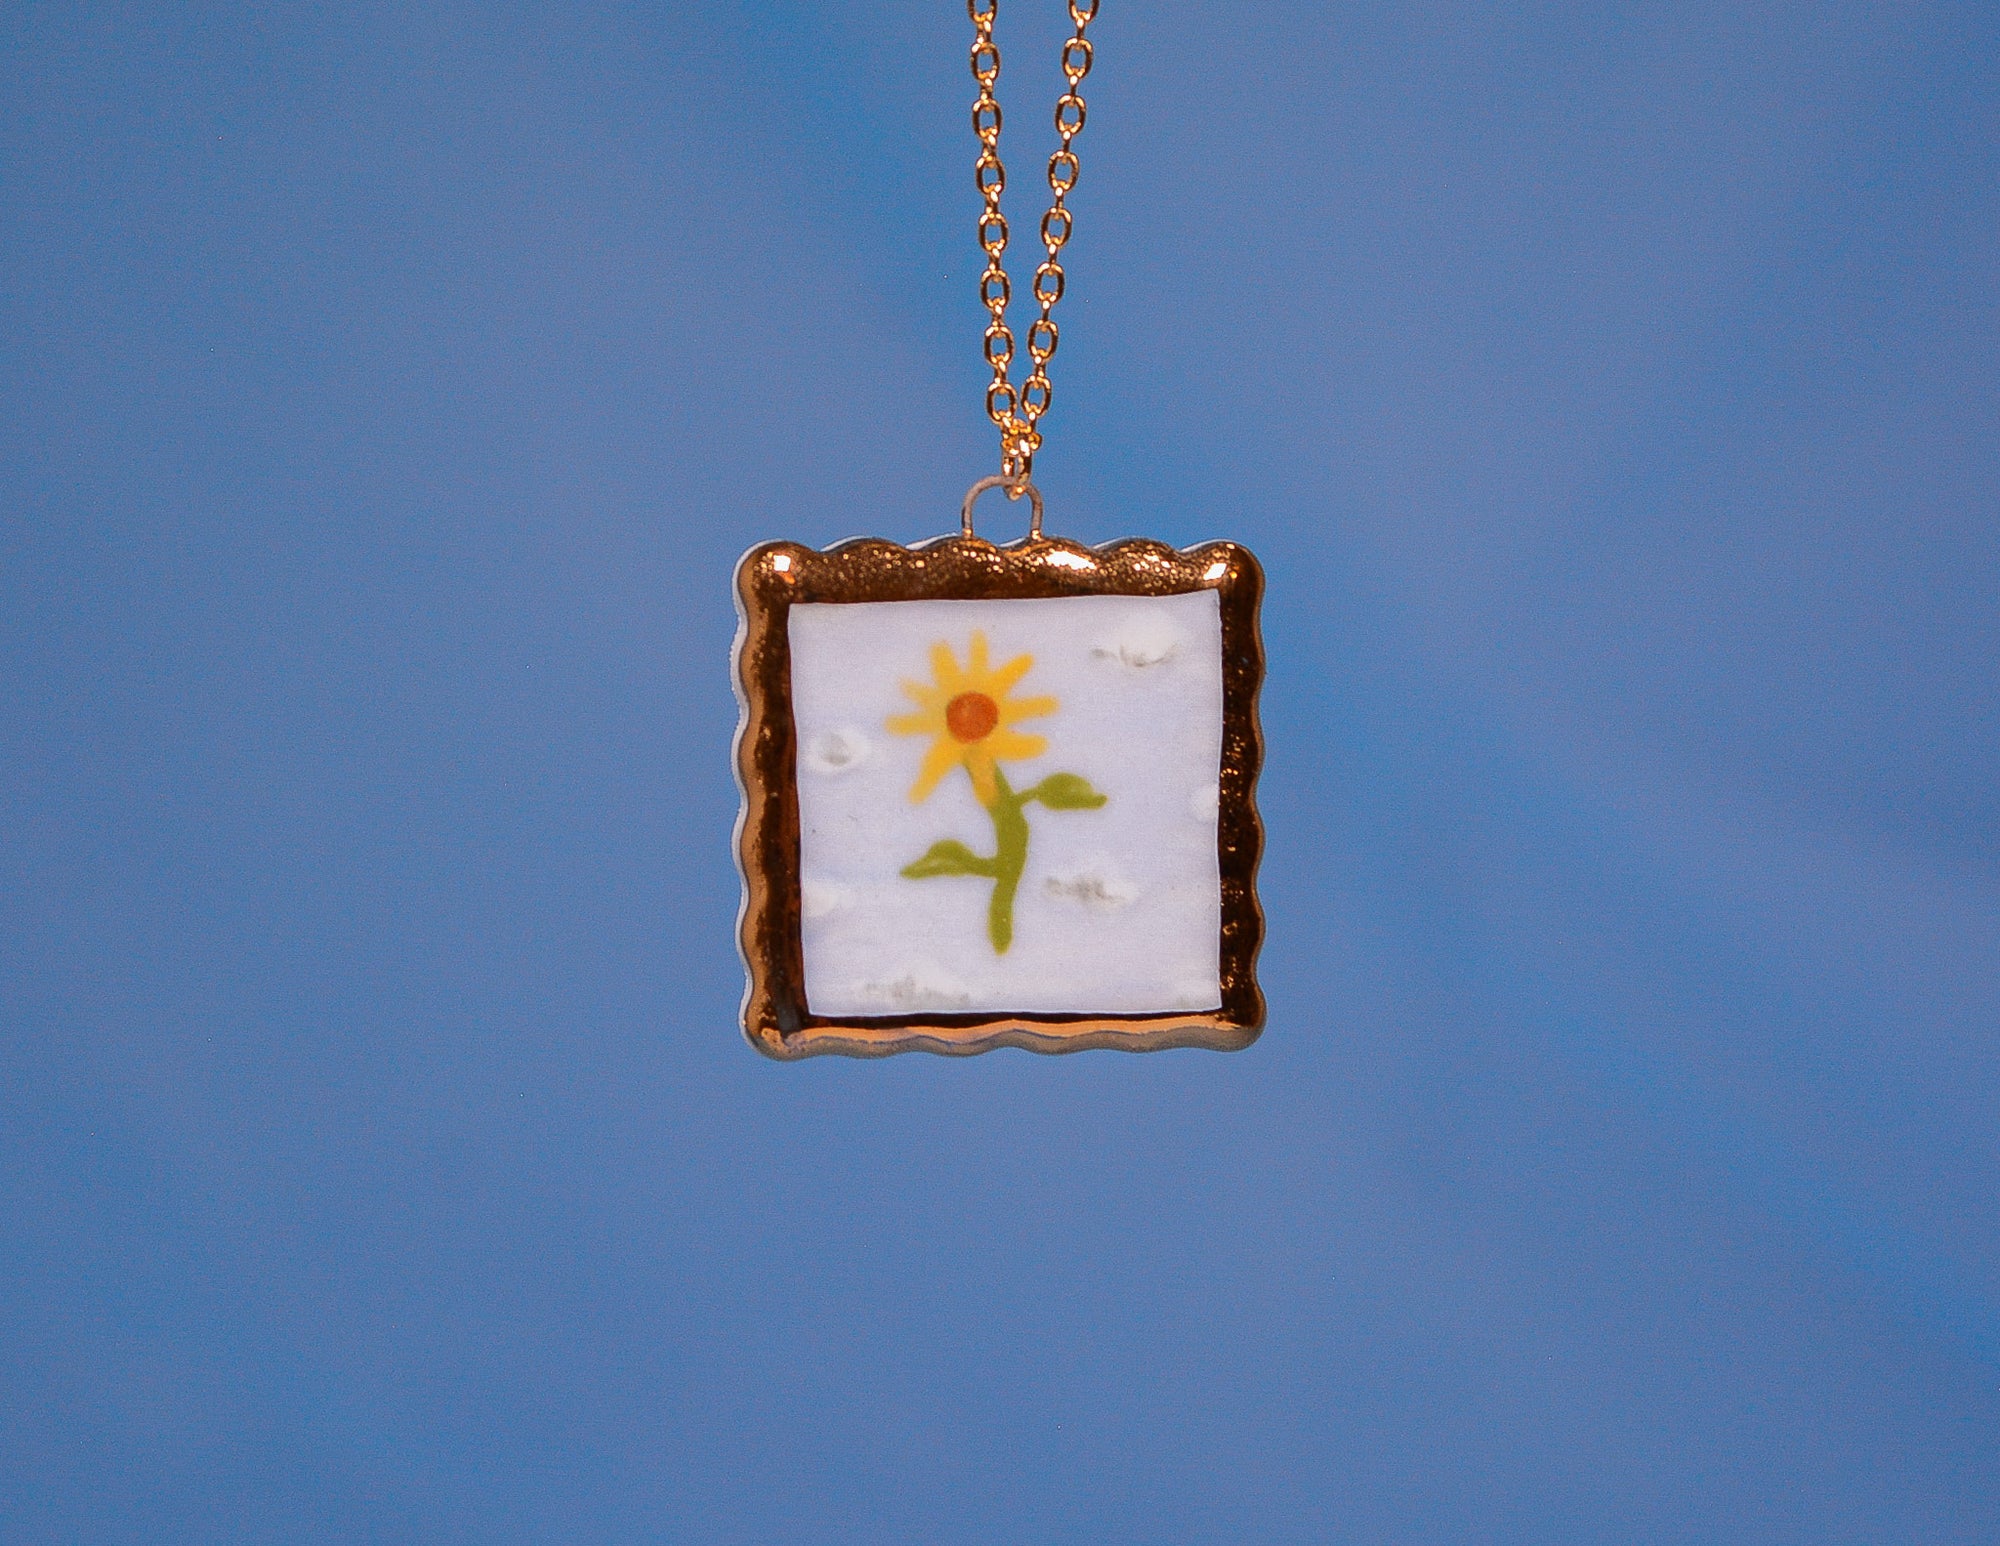 Sky Sunflower Painting Necklace